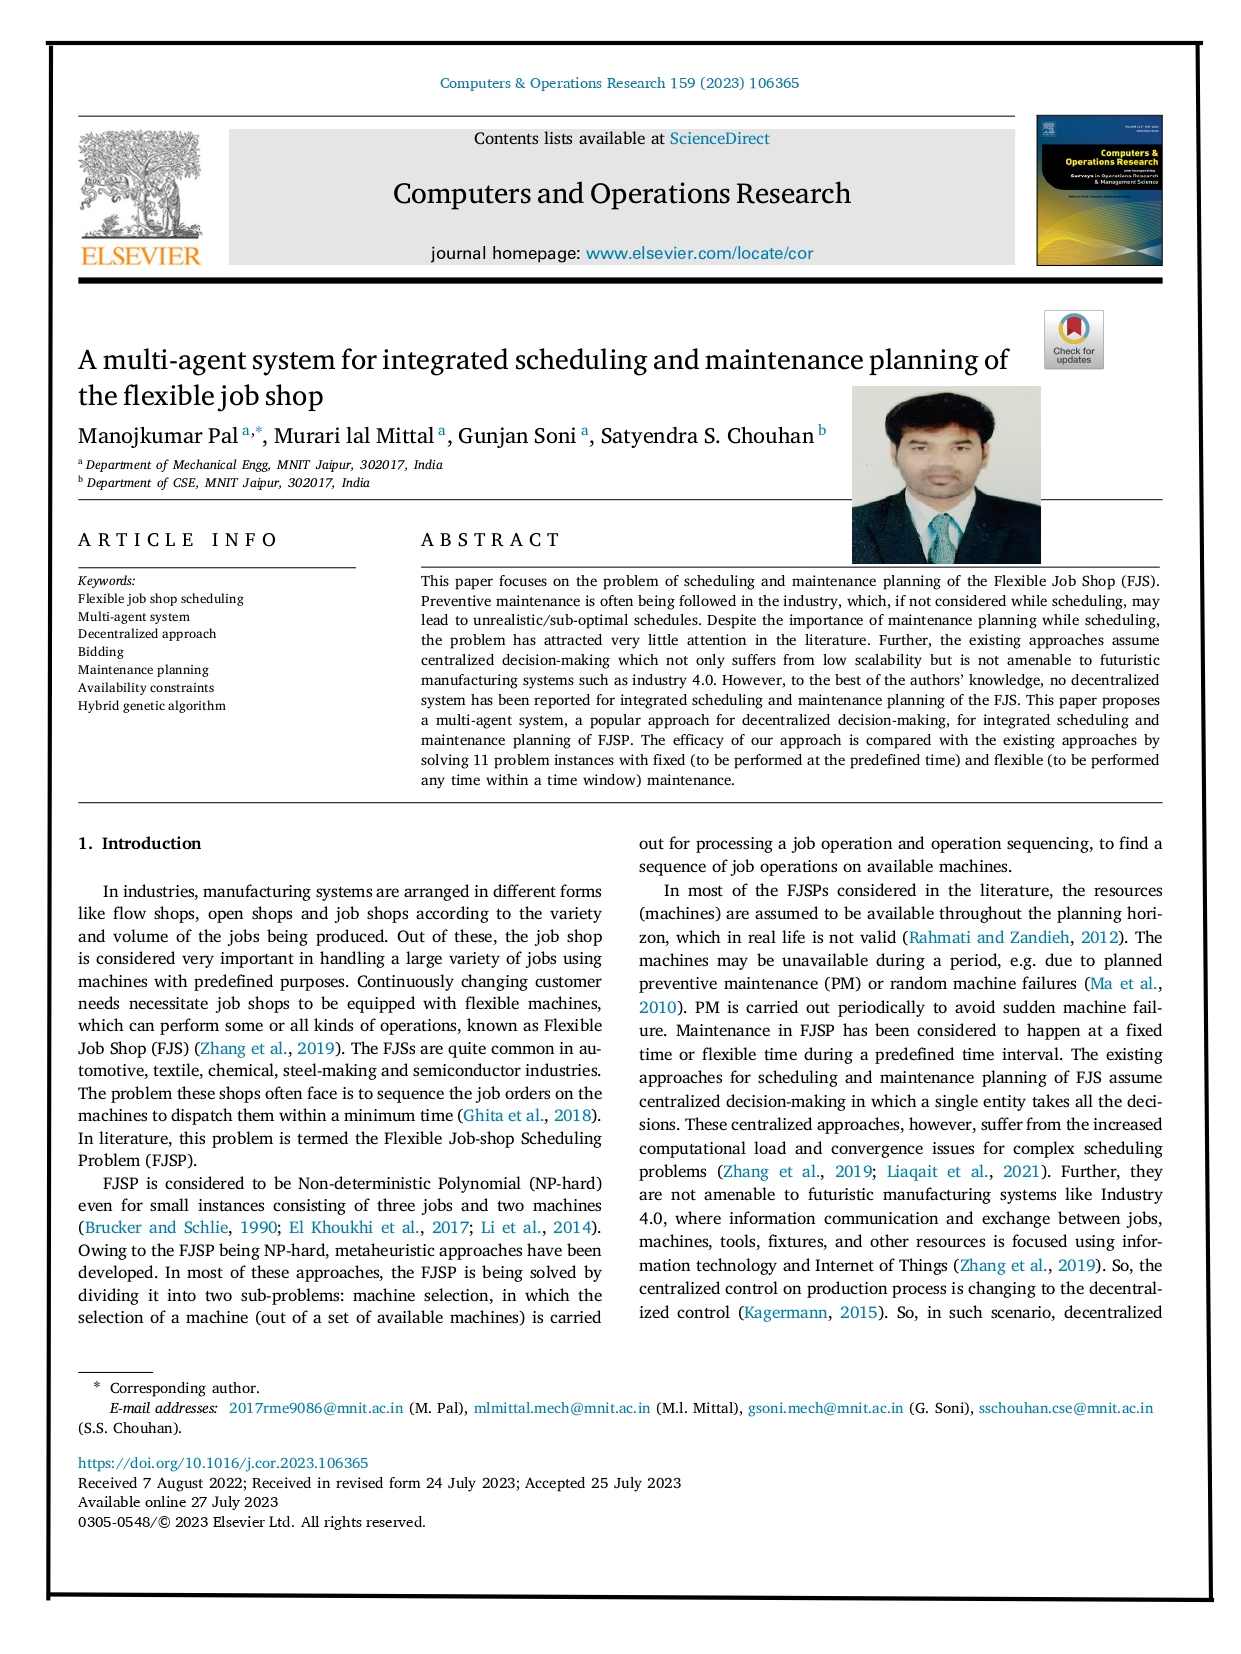 A multi-agent system for integrated scheduling and maintenance planning of the flexible job shop